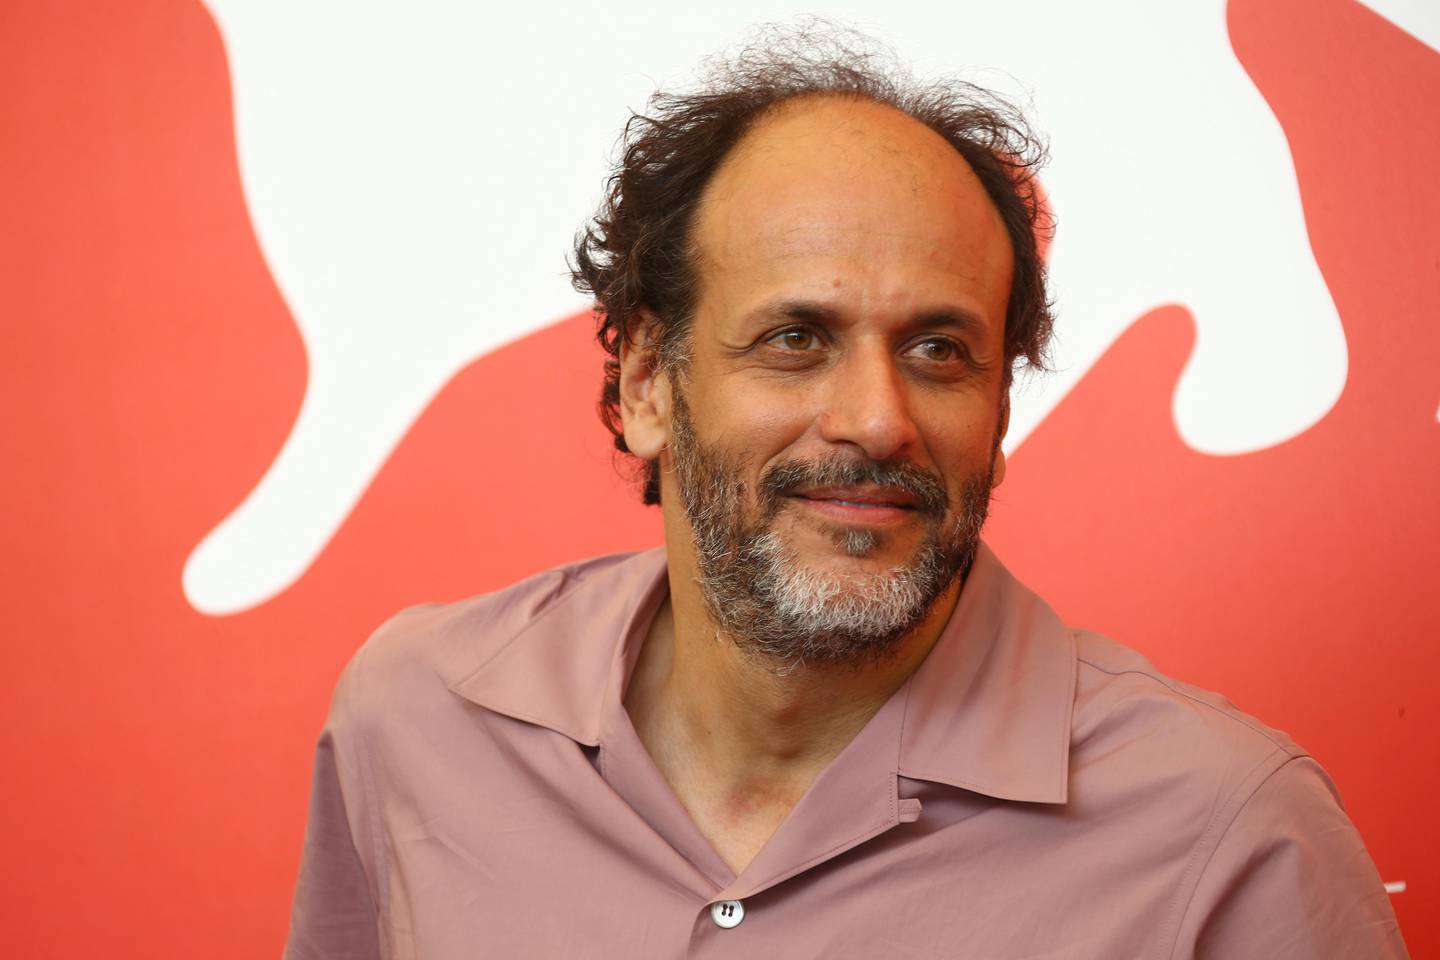 Director Luca Guadagnino poses for photographers at the photo call for the film 'Suspiria' at the 75th edition of the Venice Film Festival in Venice, Italy, Saturday, Sept. 1, 2018. (Photo by Joel C Ryan/Invision/AP)